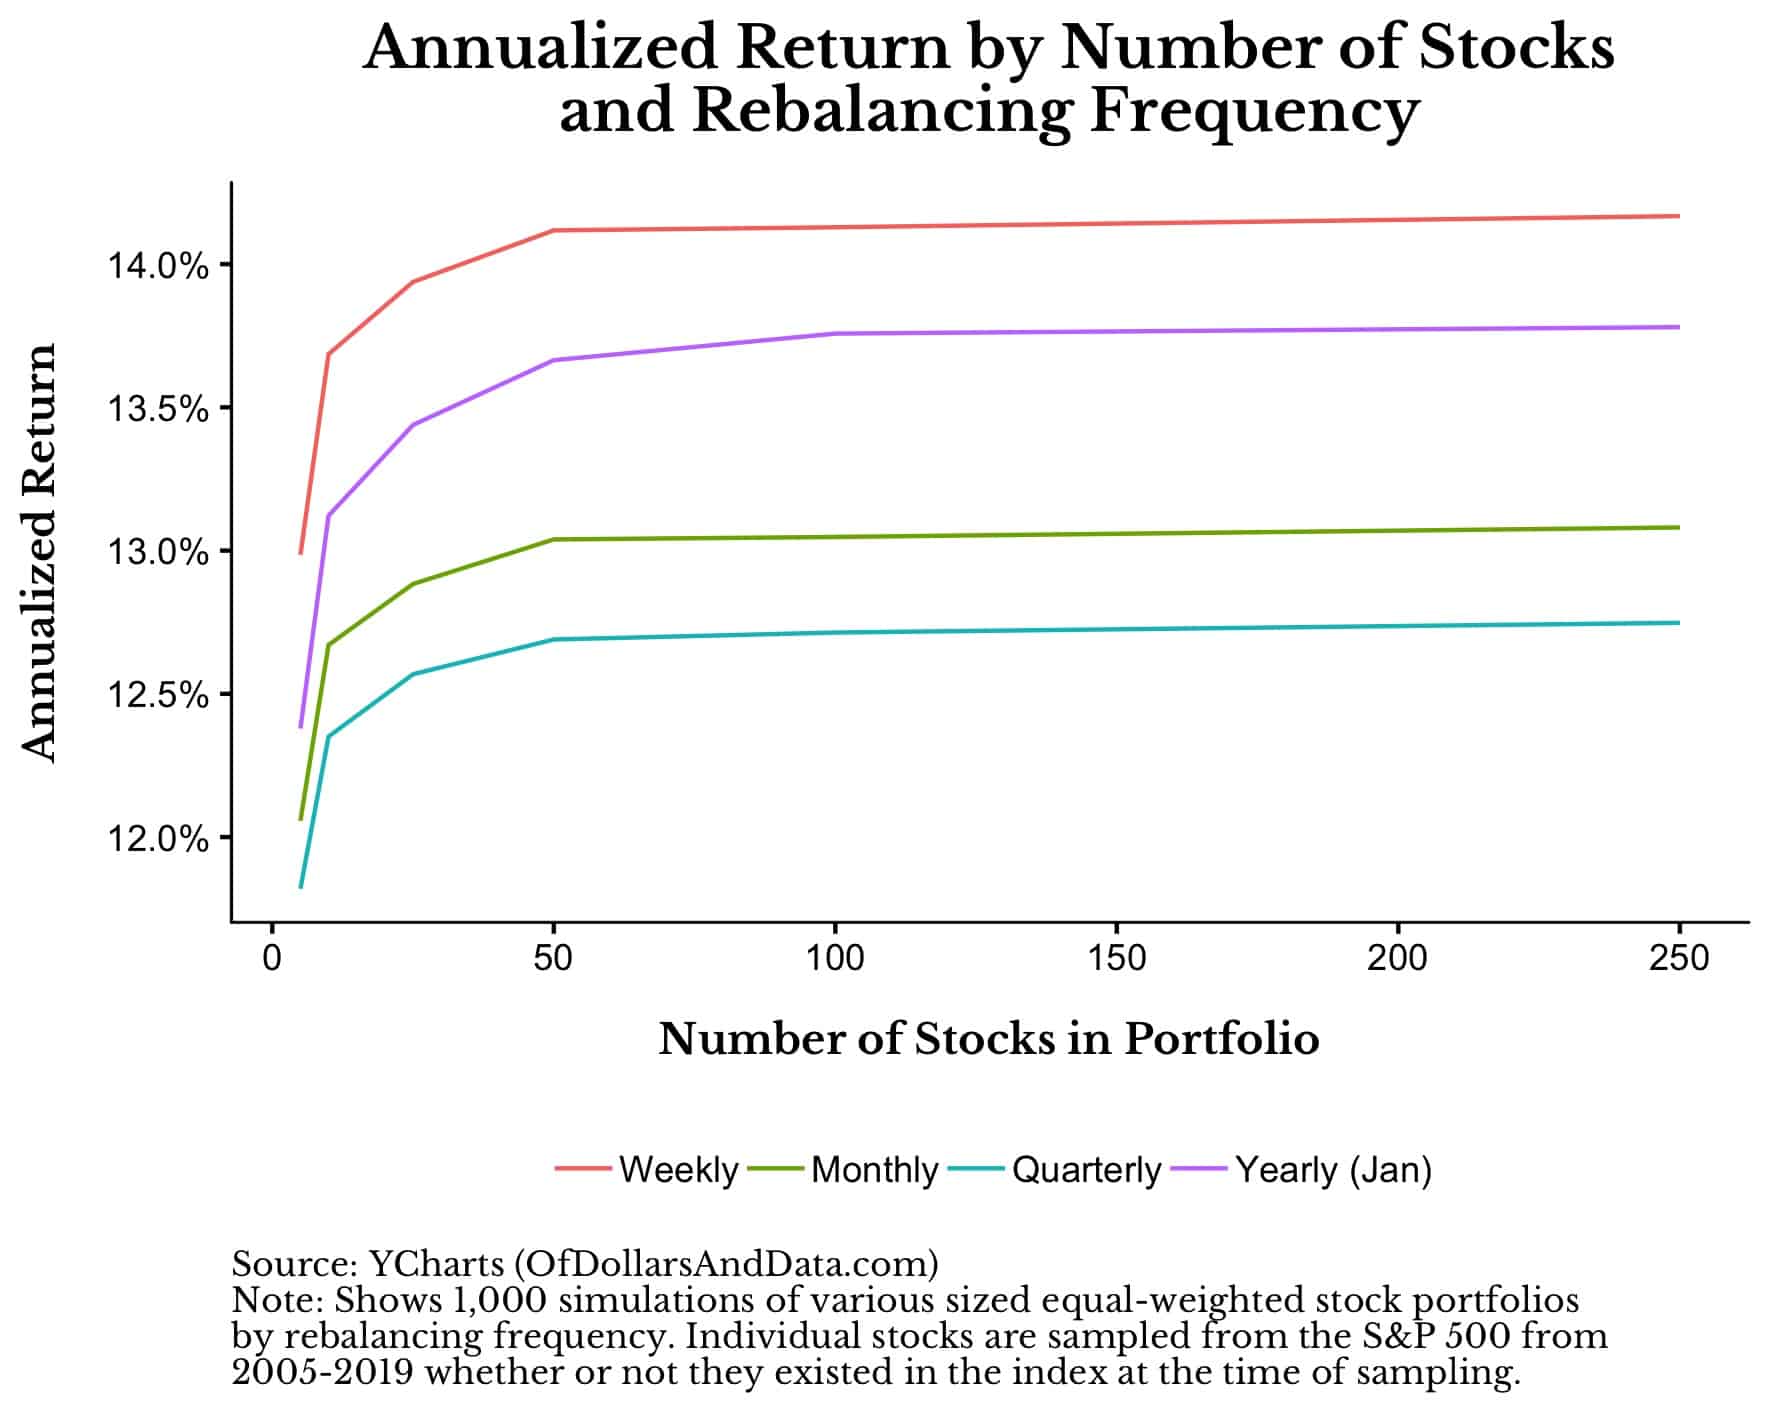 Annualized return by number of stocks and rebalancing frequency where yearly rebalancing is done in January.